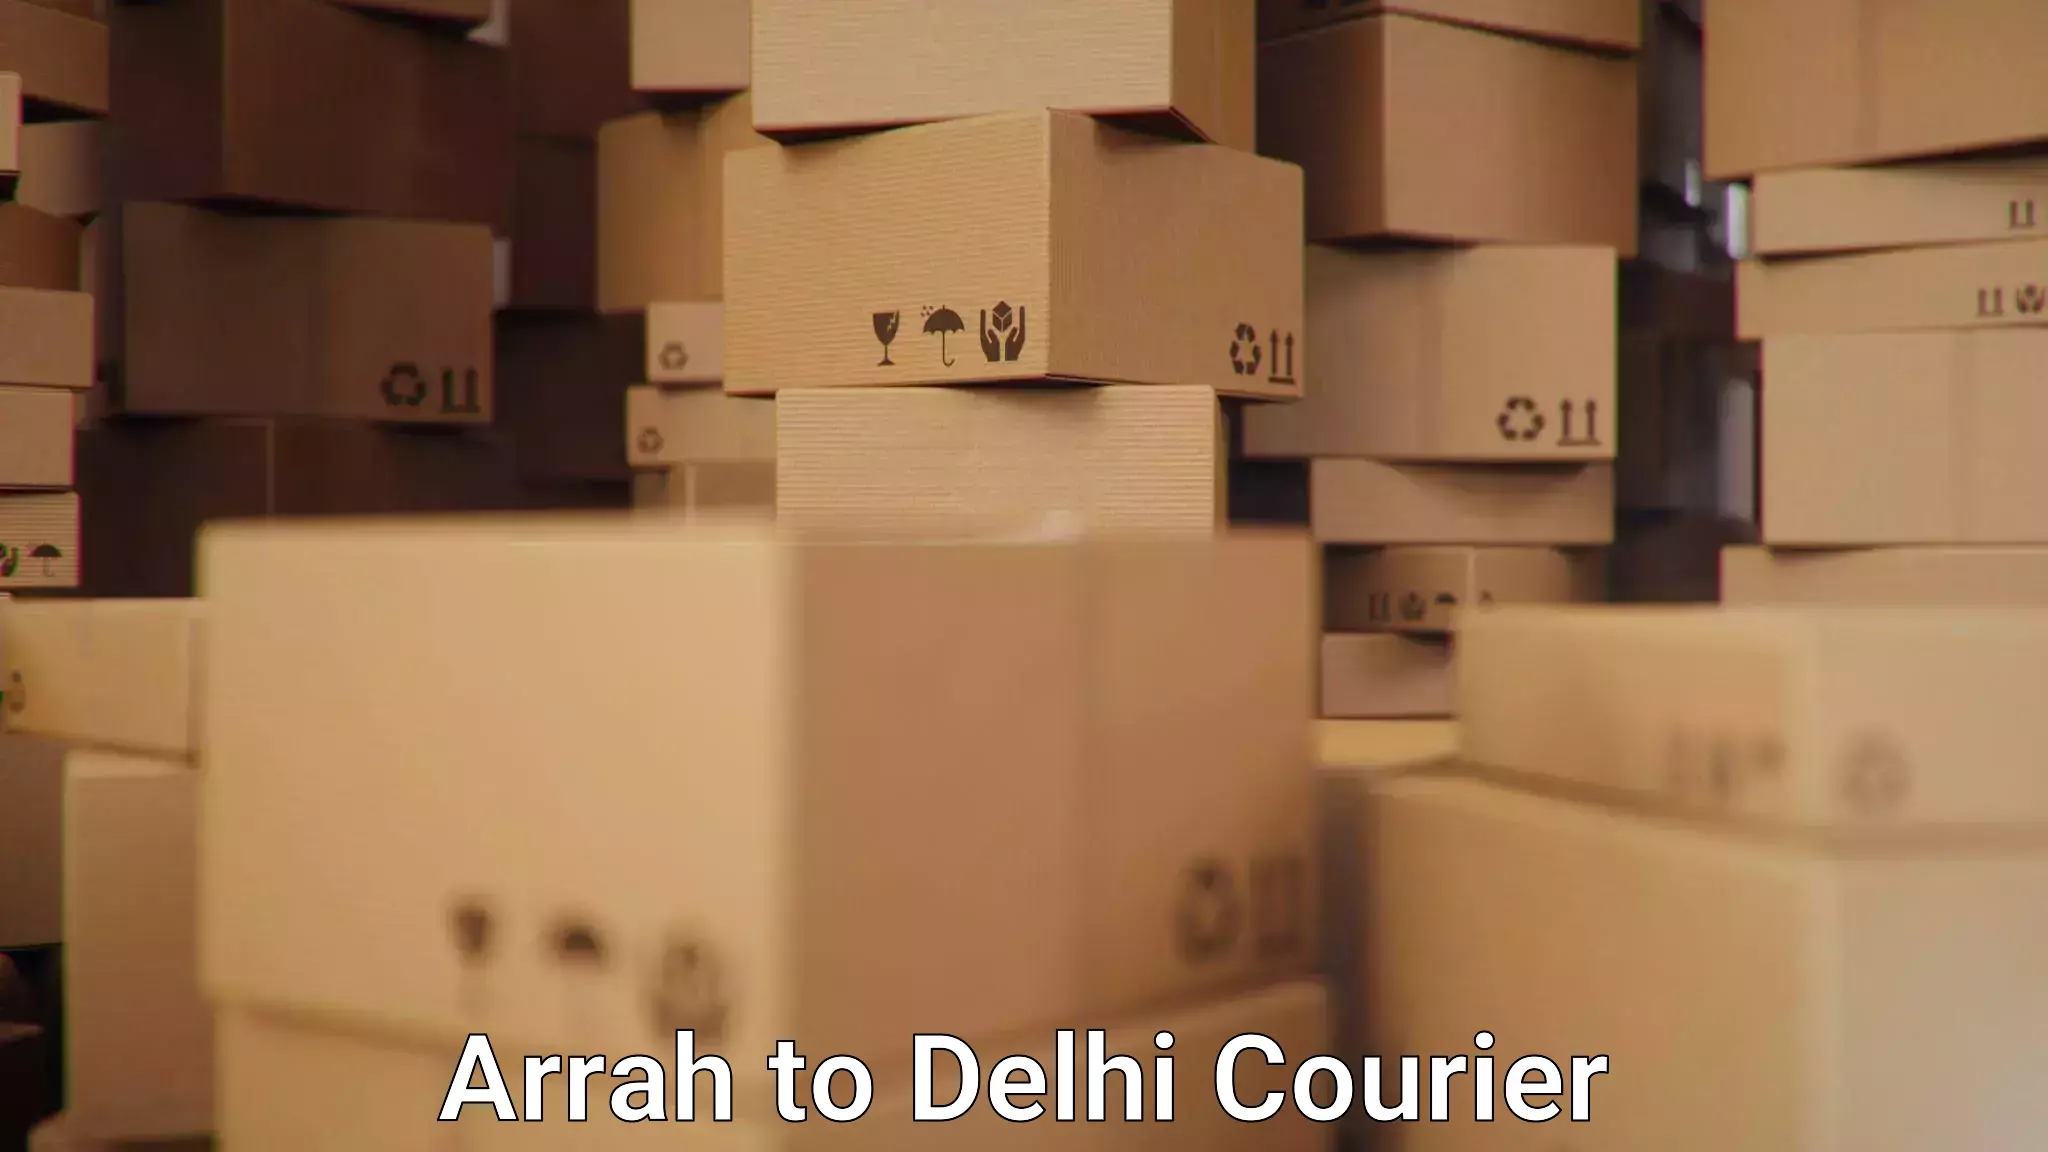 Budget-friendly shipping Arrah to NCR